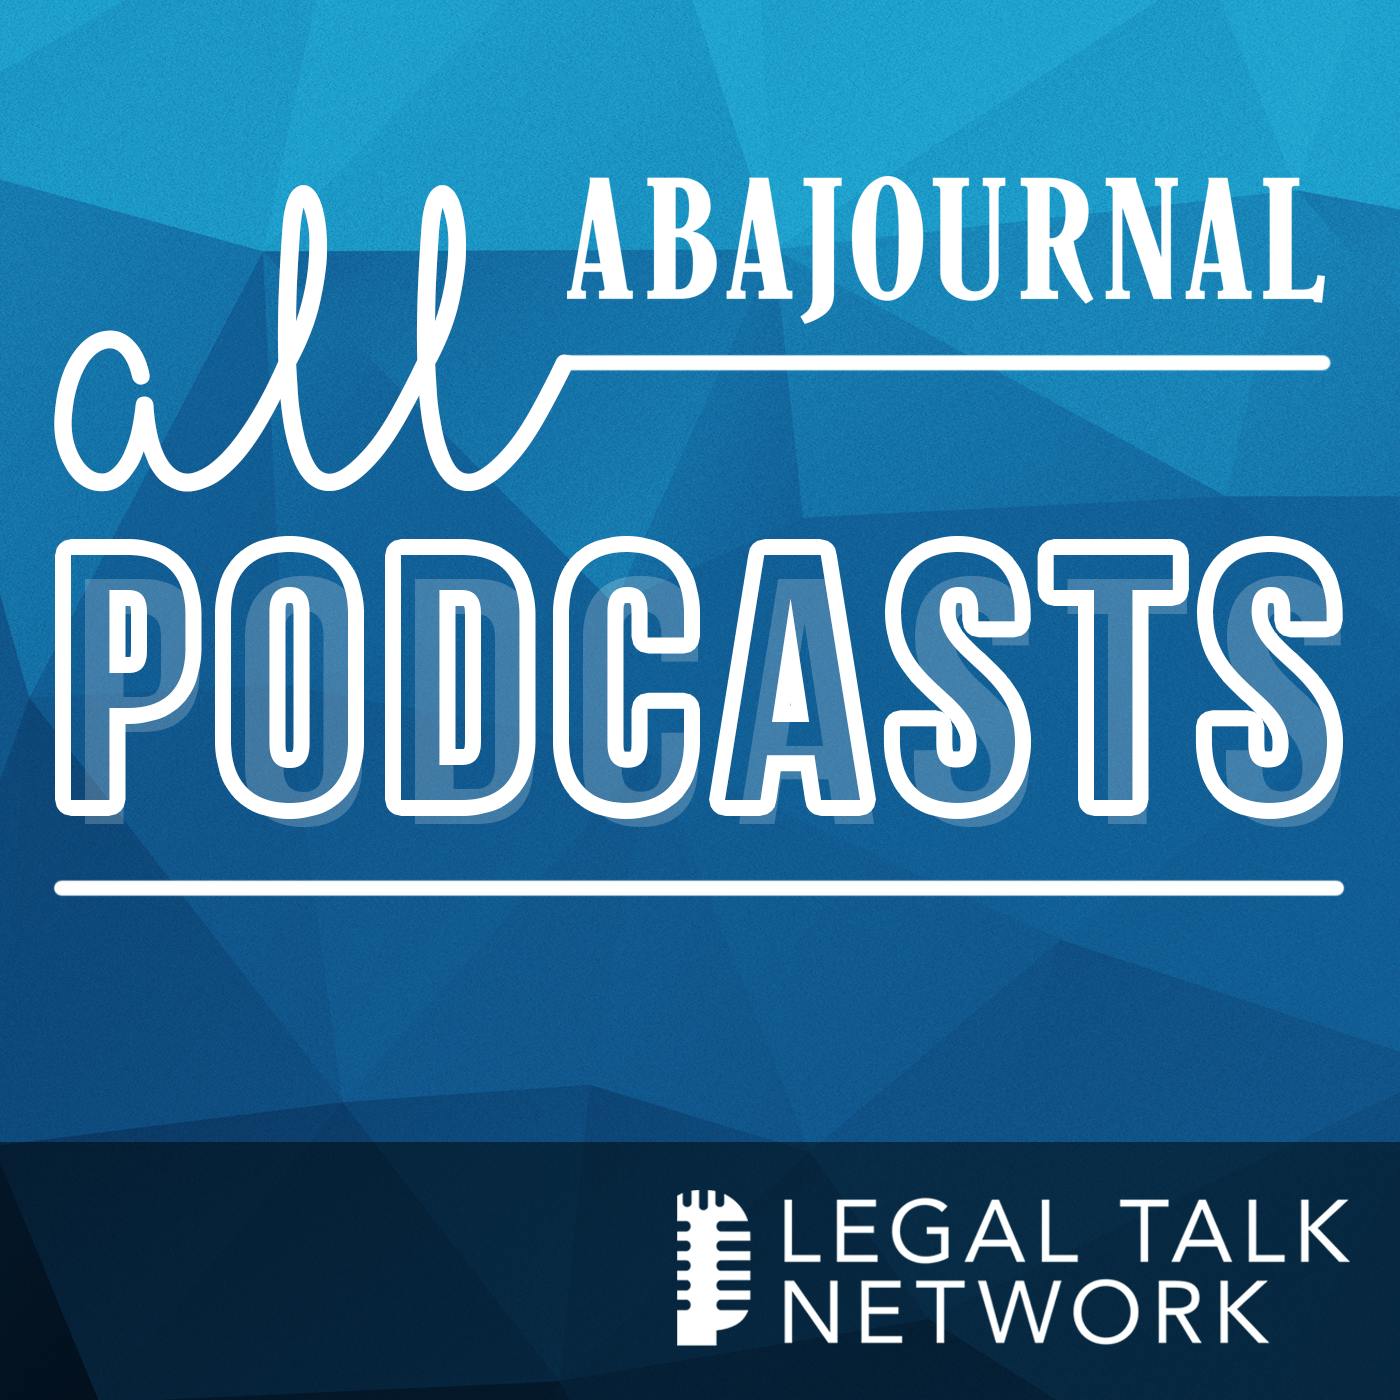 ABA Journal Podcasts - Legal Talk Network